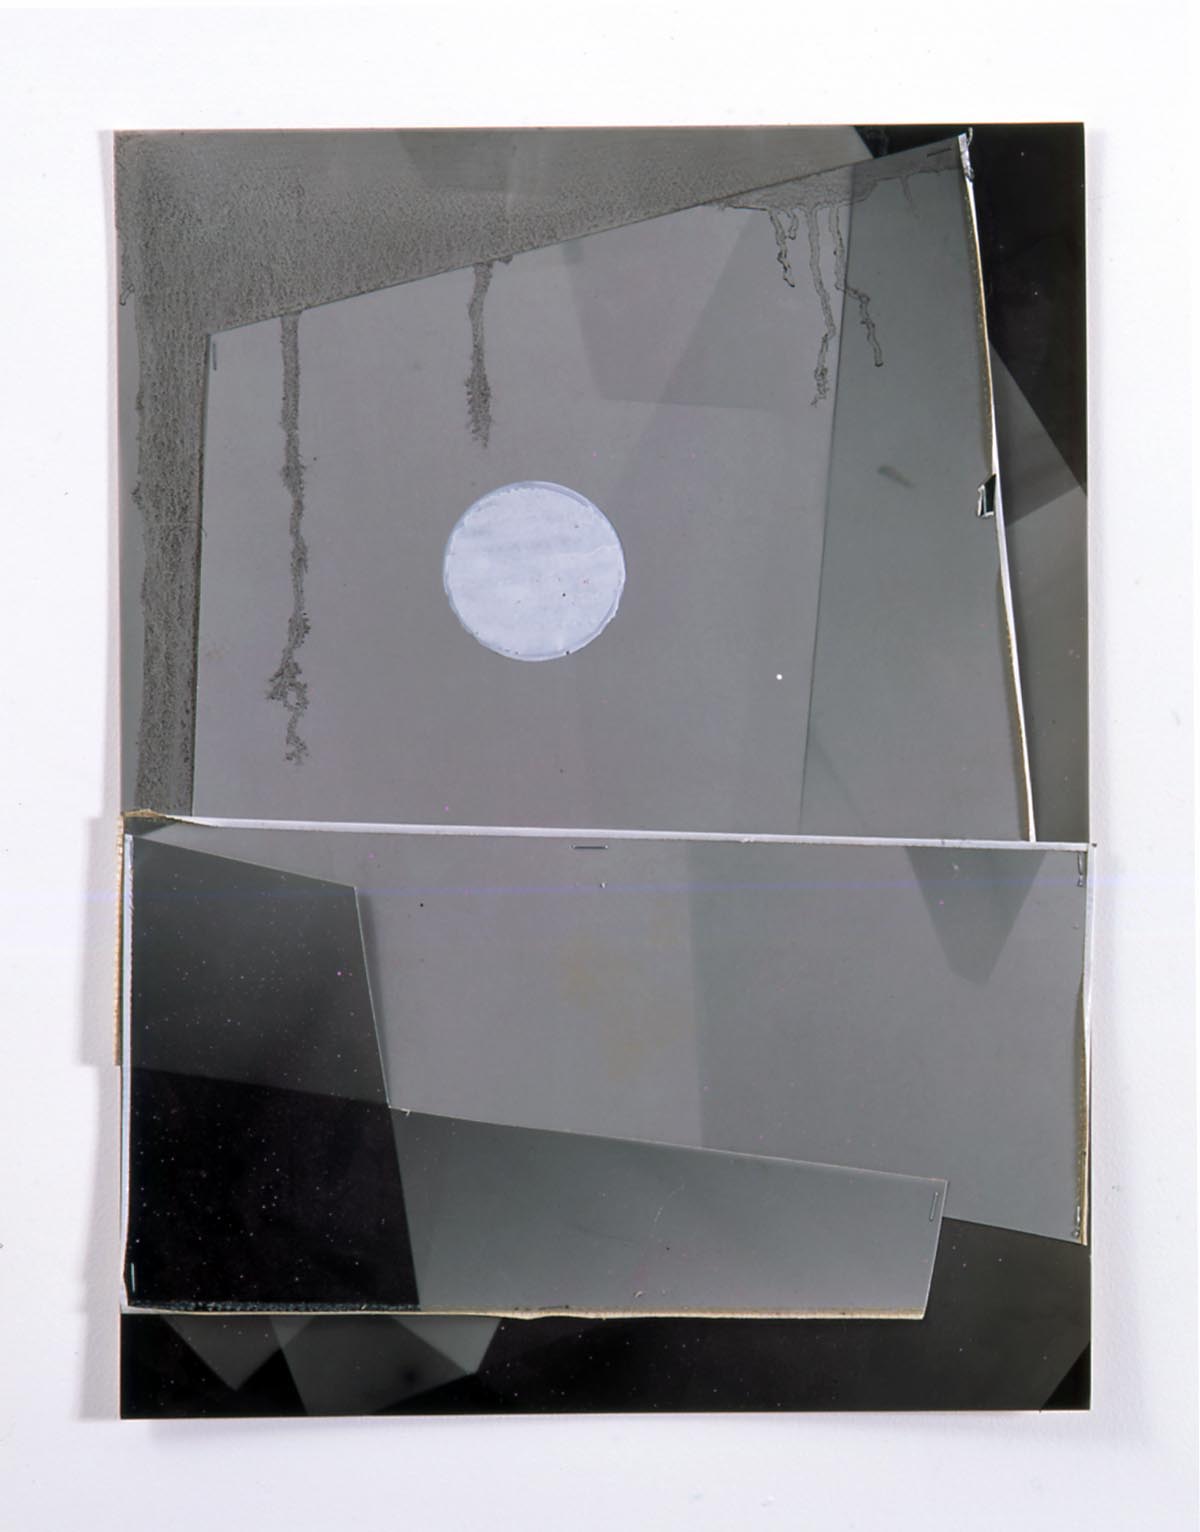     Untitled 2005 paint marker, tape, staples, oil paint, spray paint on collaged photograms 40.5x30.5cm    